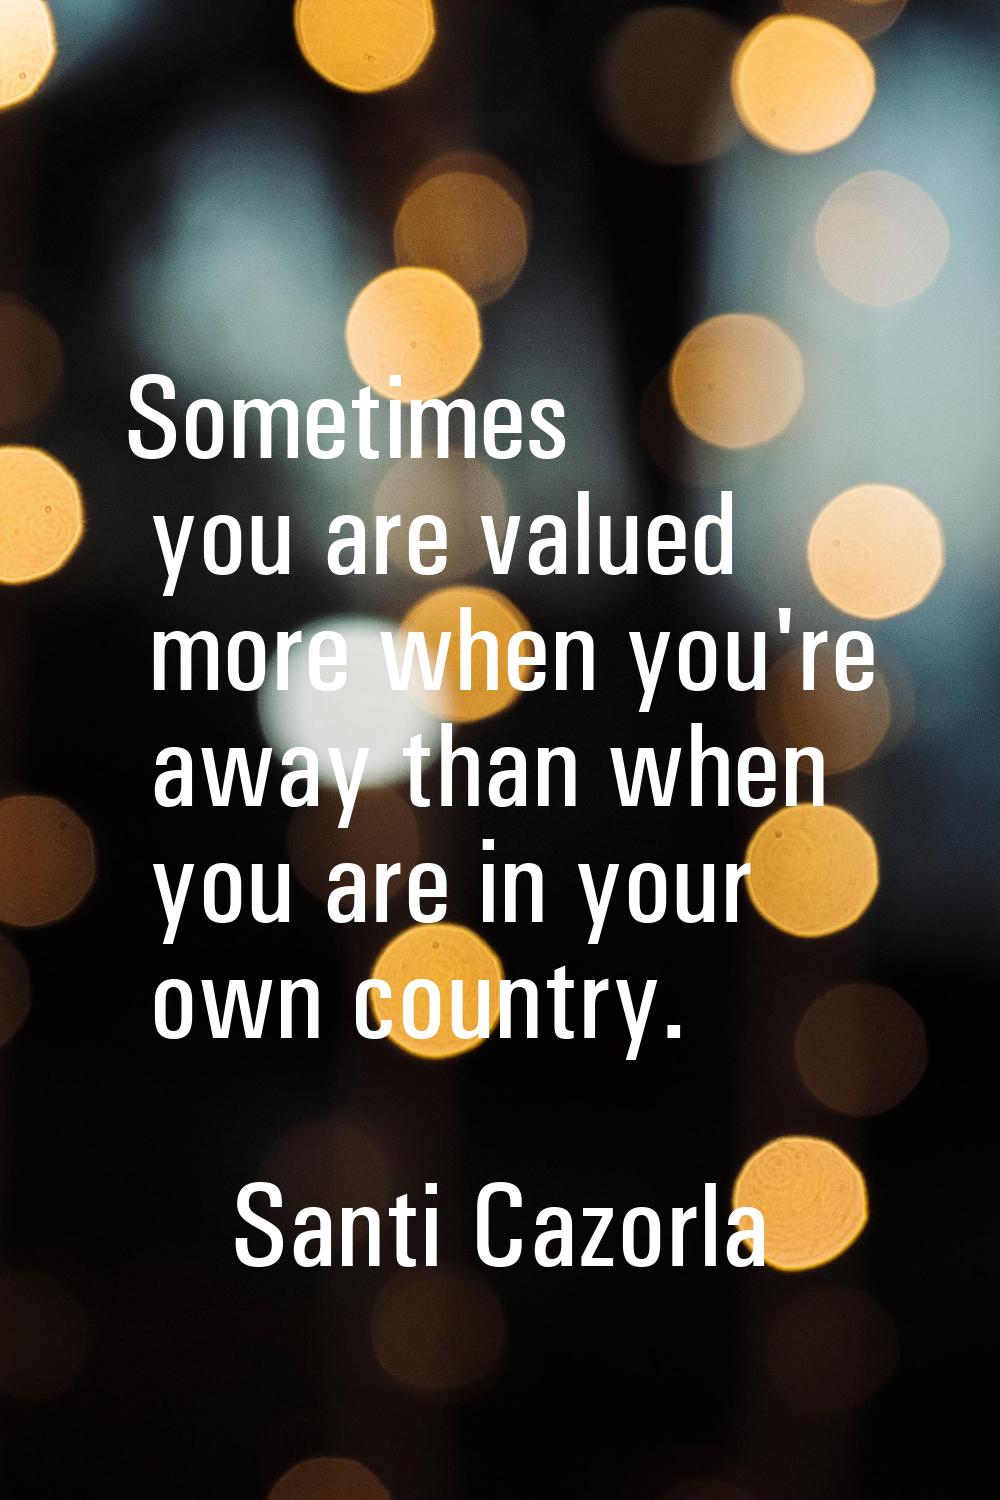 Sometimes you are valued more when you're away than when you are in your own country.